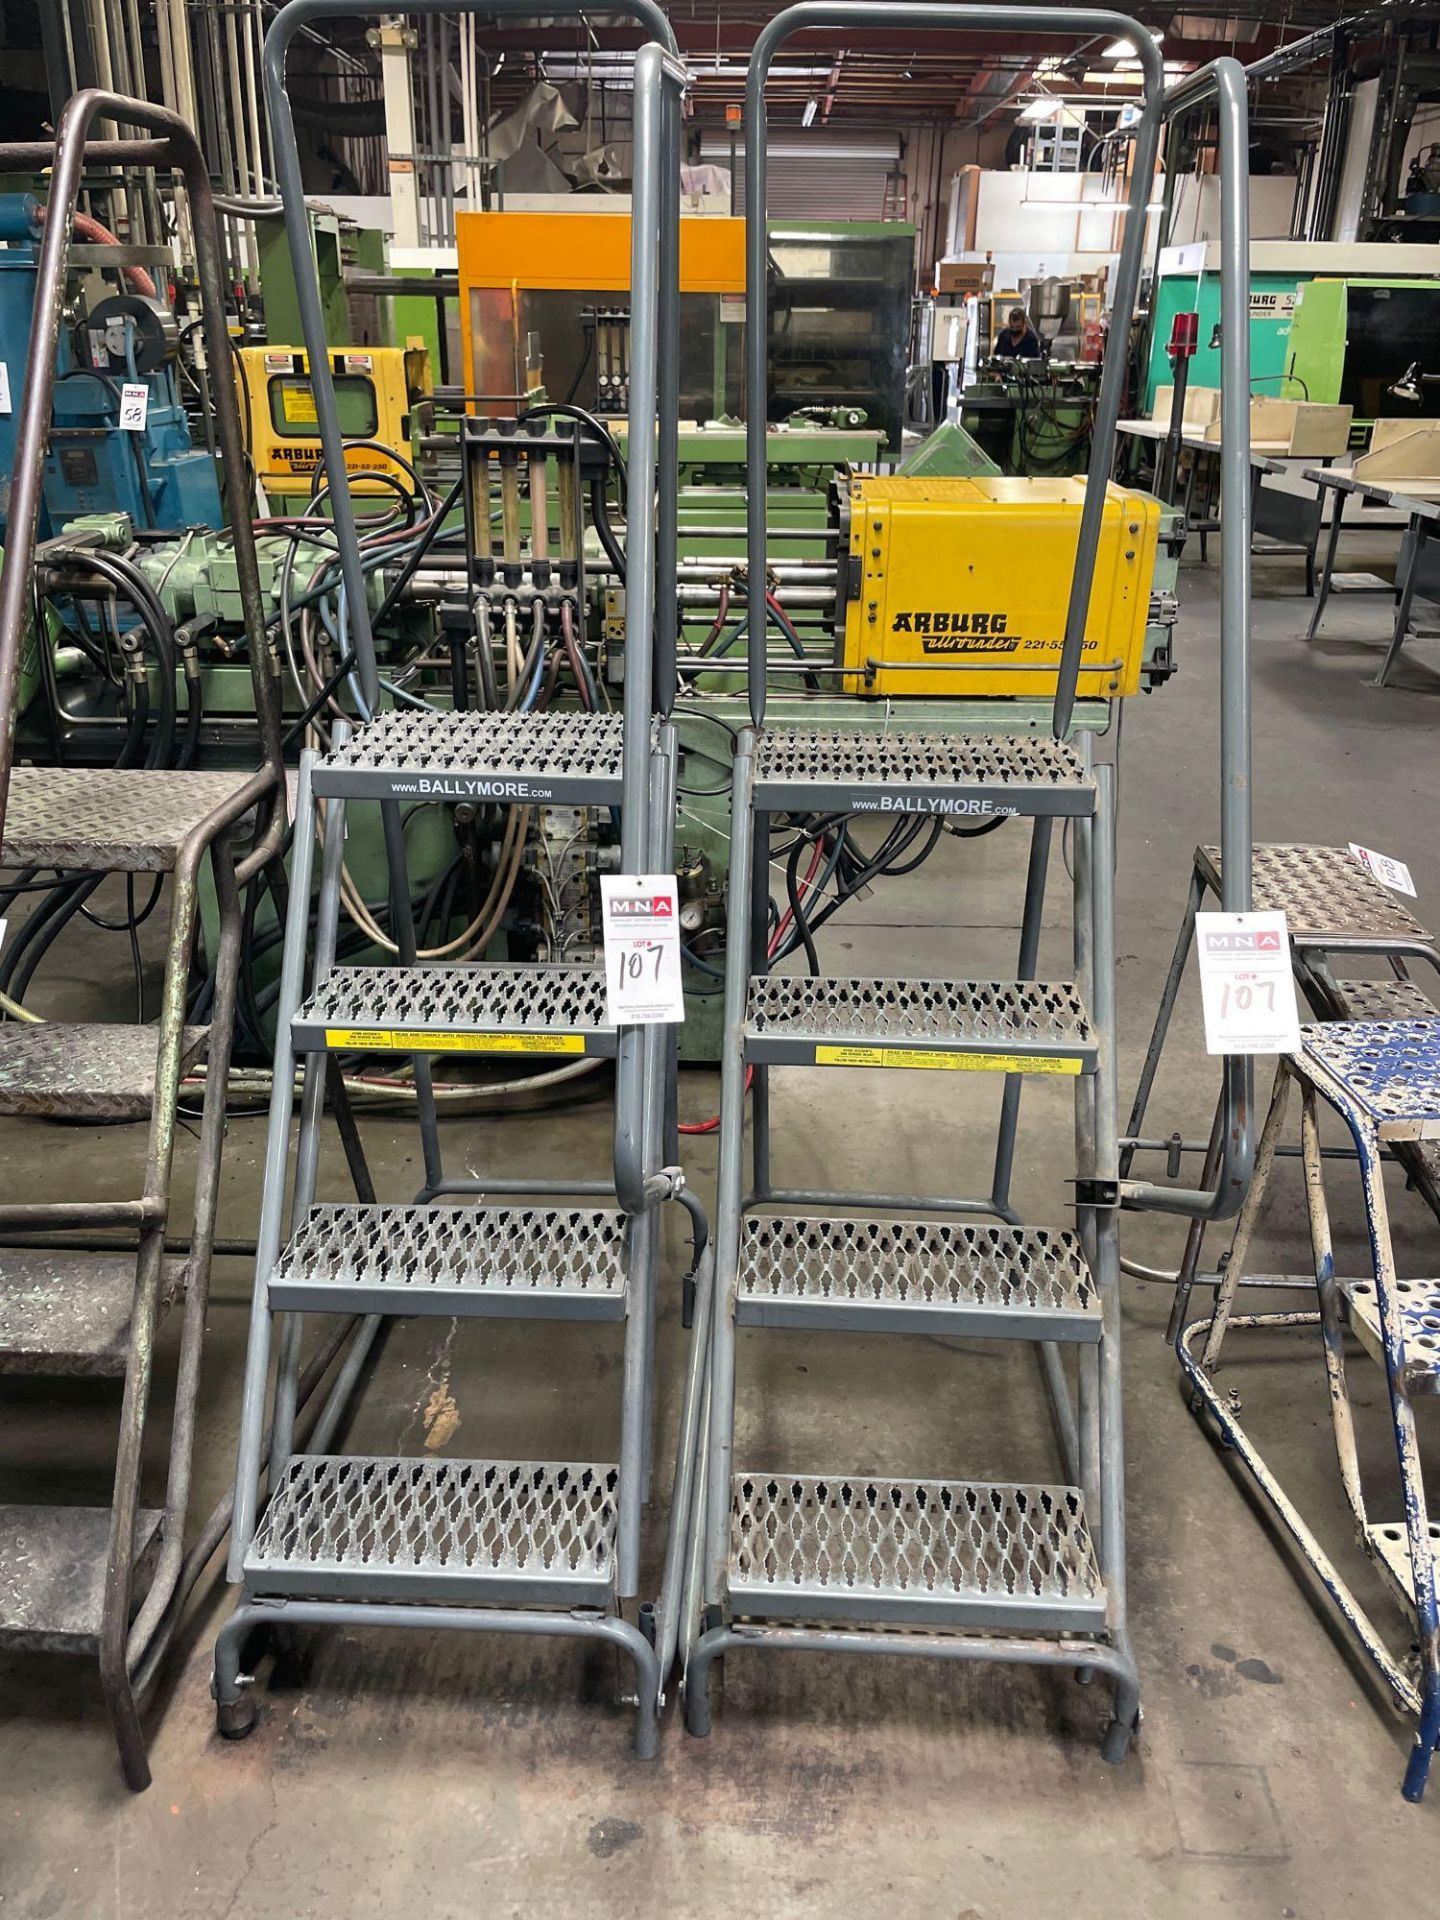 (2) Ballymore 4 Step Ladders